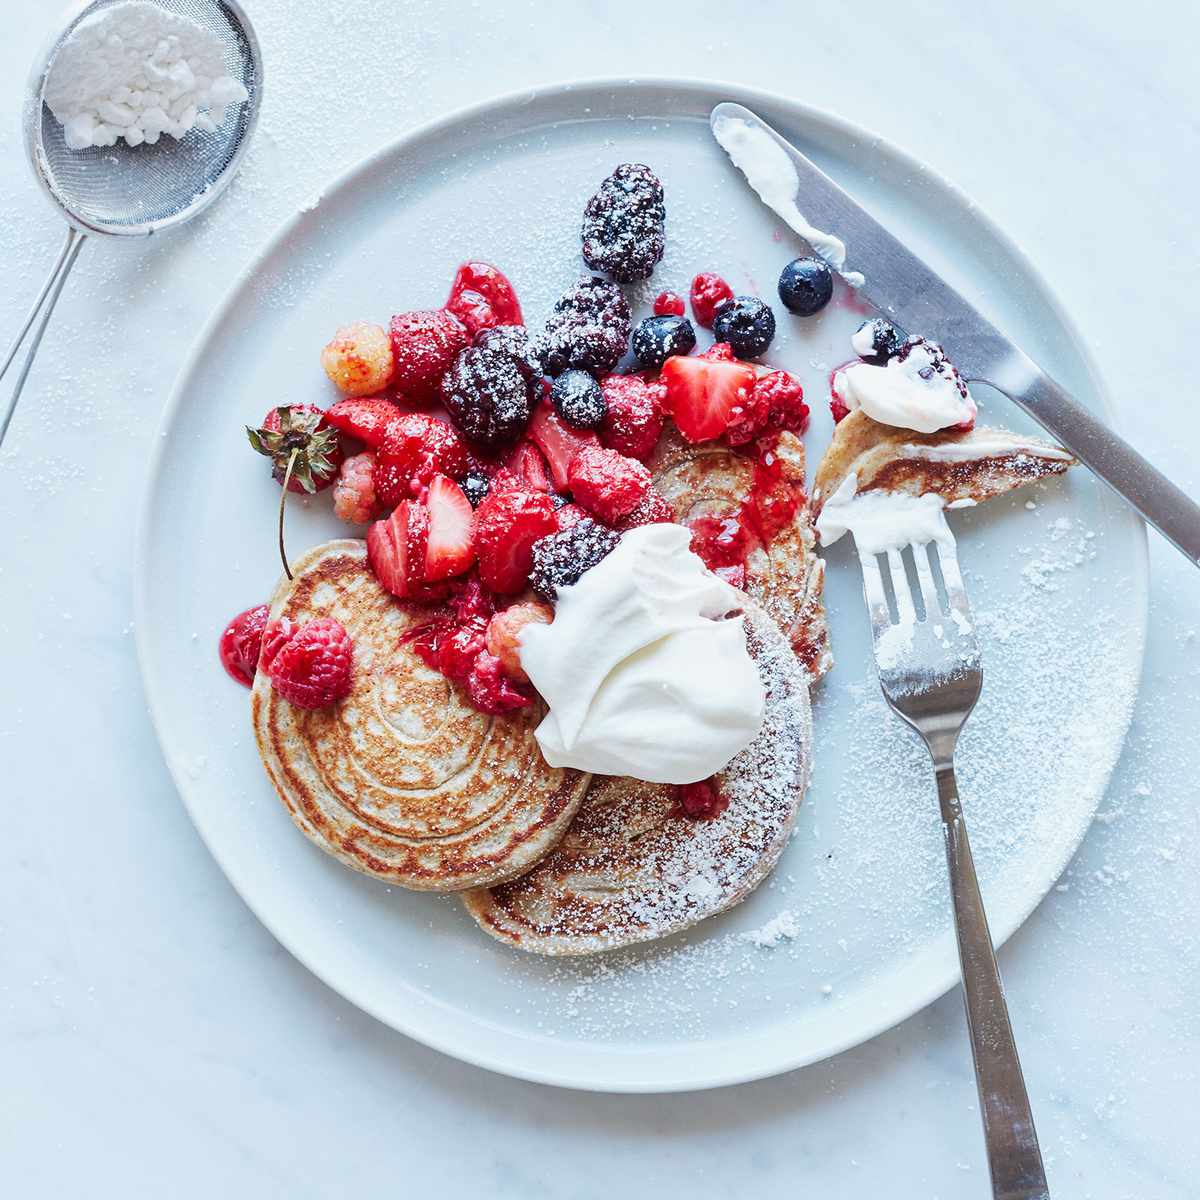 Whole-Wheat Pancakes with Roasted Berries